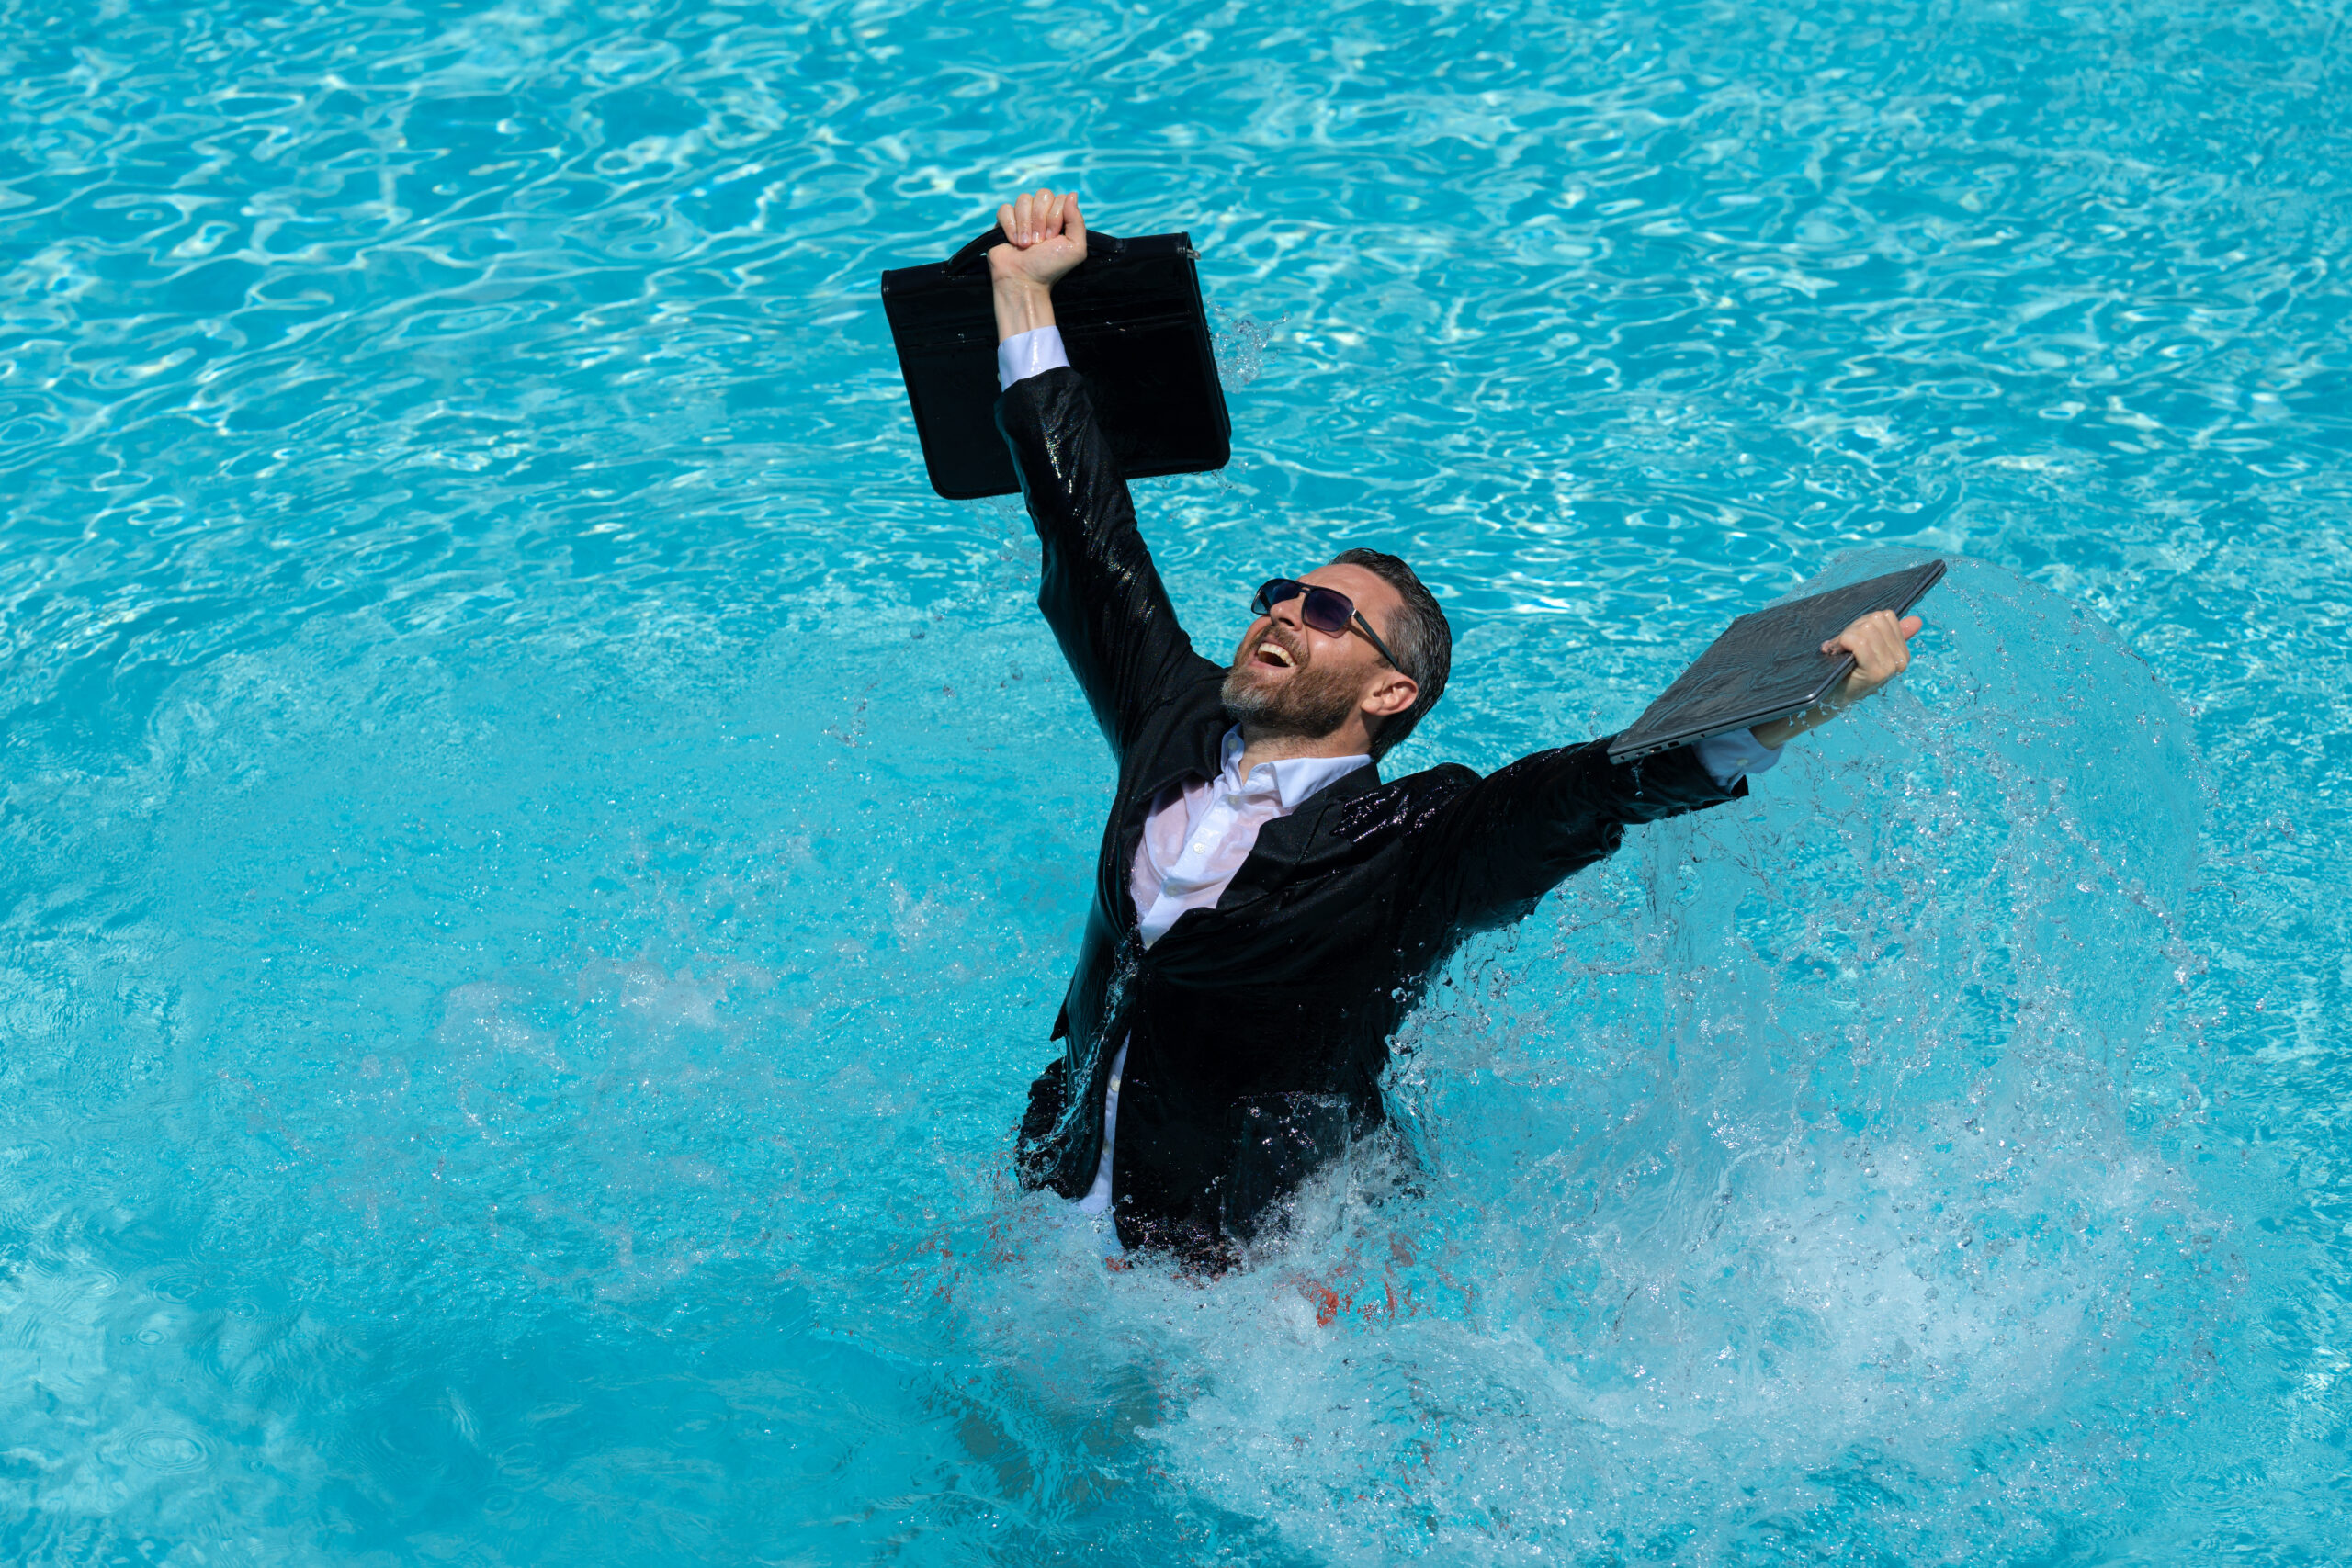 Four Strategies Radically Transforming Employee Well-Being: businessman in wet suit excited jumping in swim pool.